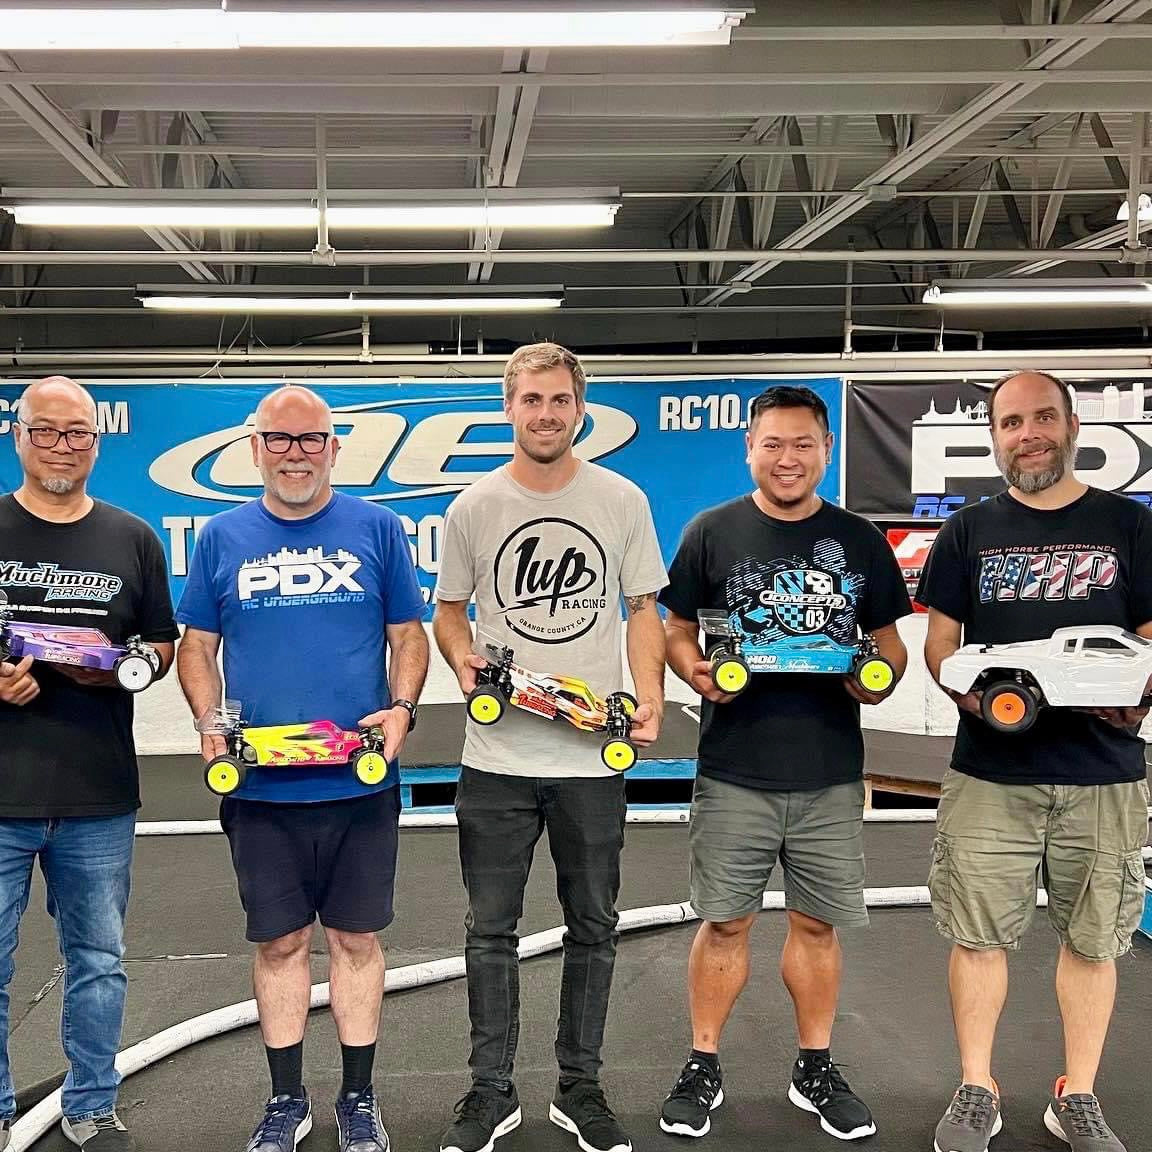 Contrats to the winners of the PDX / 1up Racing Legends of the Fall Series